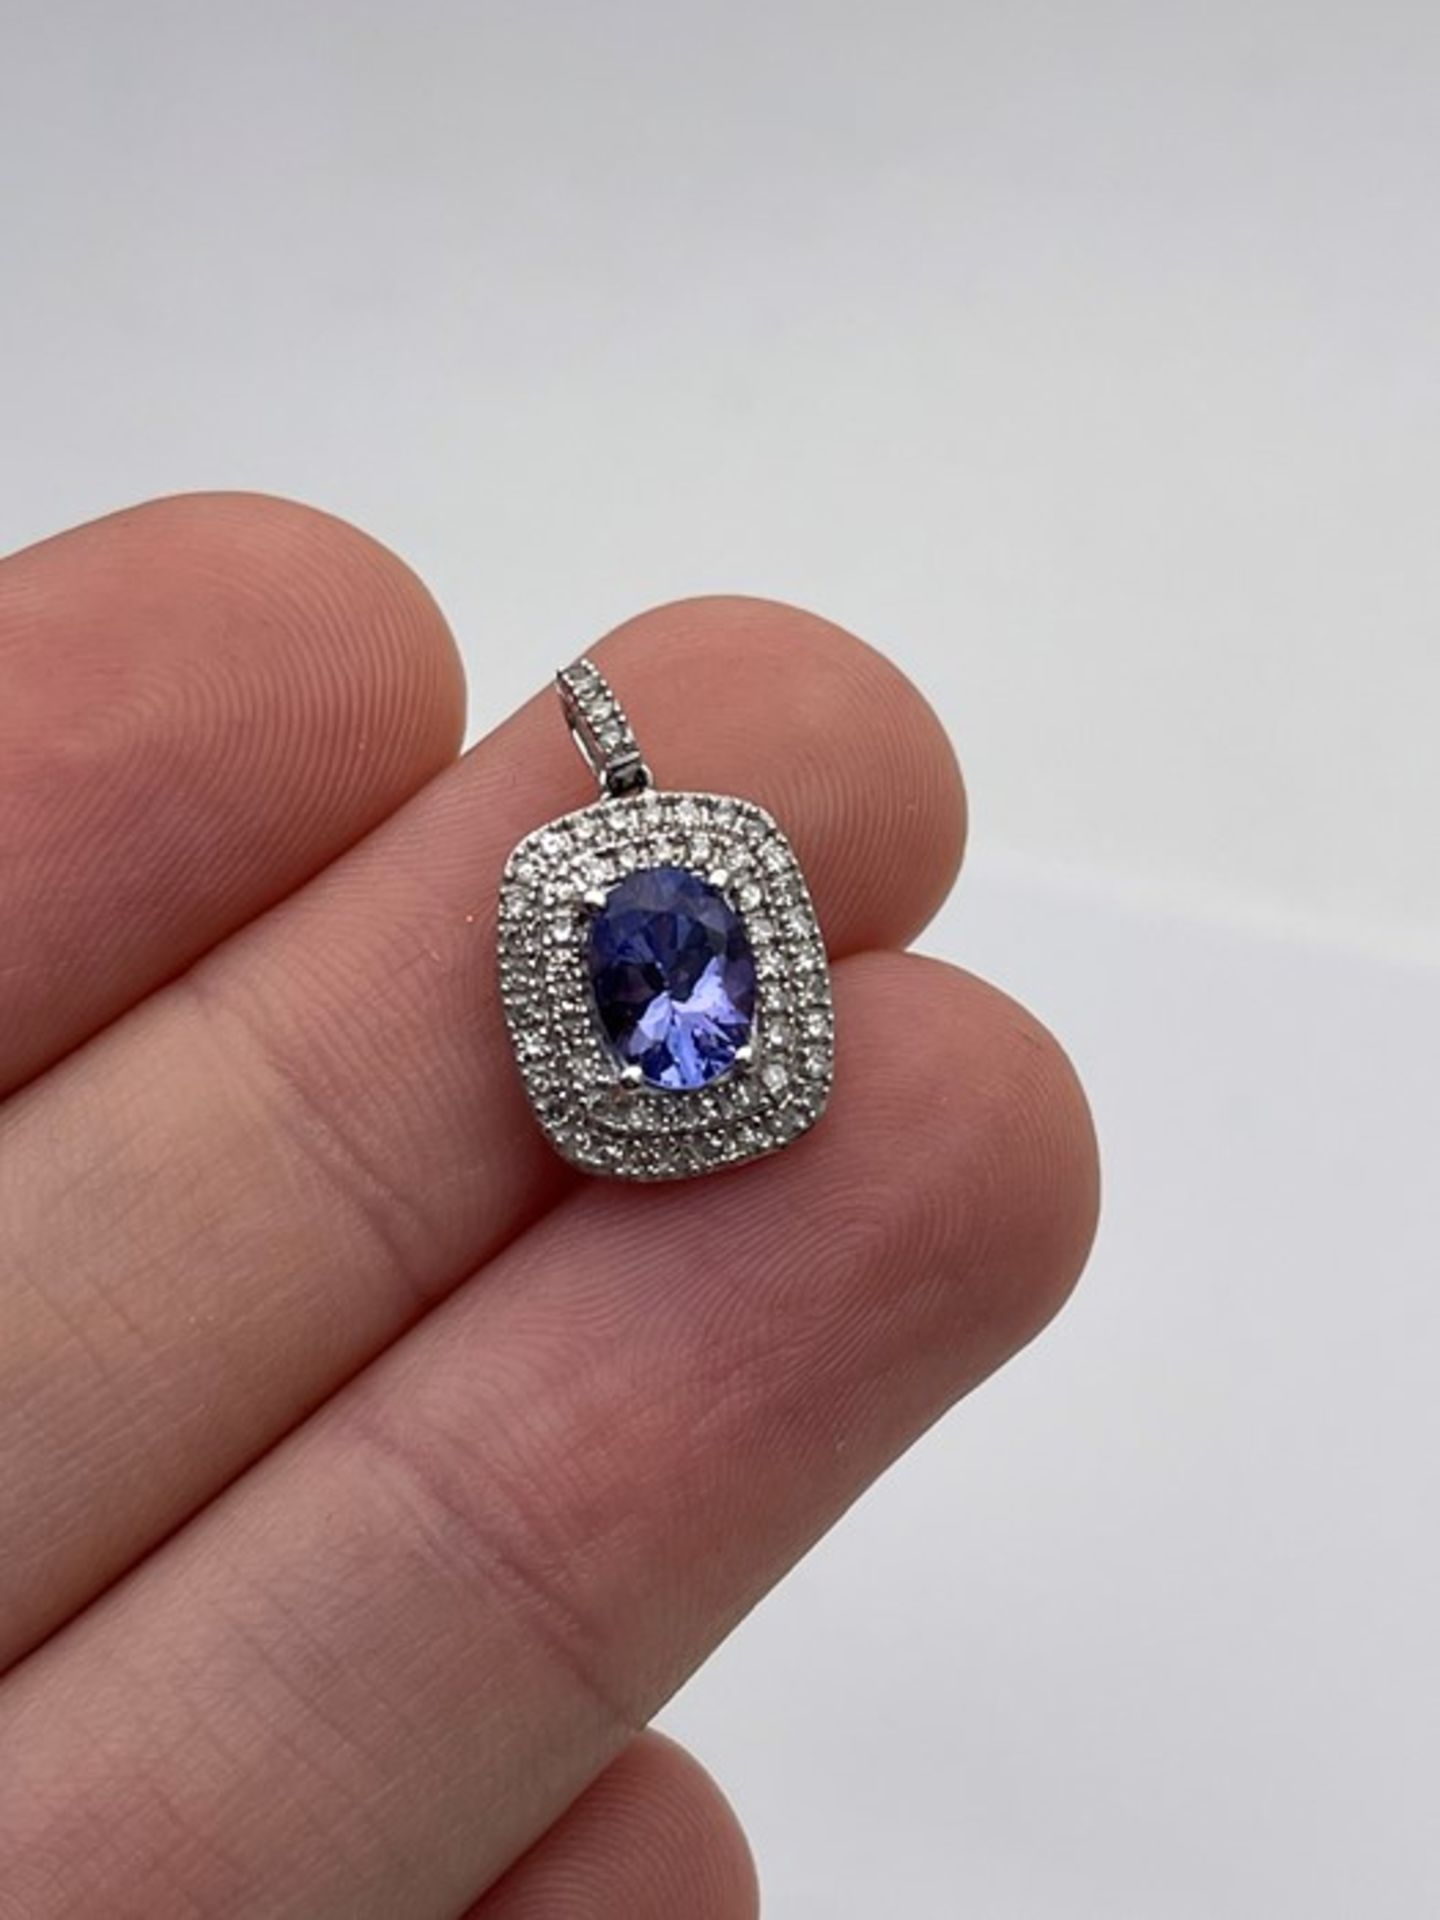 ***£2955.00*** 10K WHITE GOLD LADIES DIAMOND AND TANZANITE PENDENT, D/VS QUALITY, INCLUDES GIE - Image 2 of 3